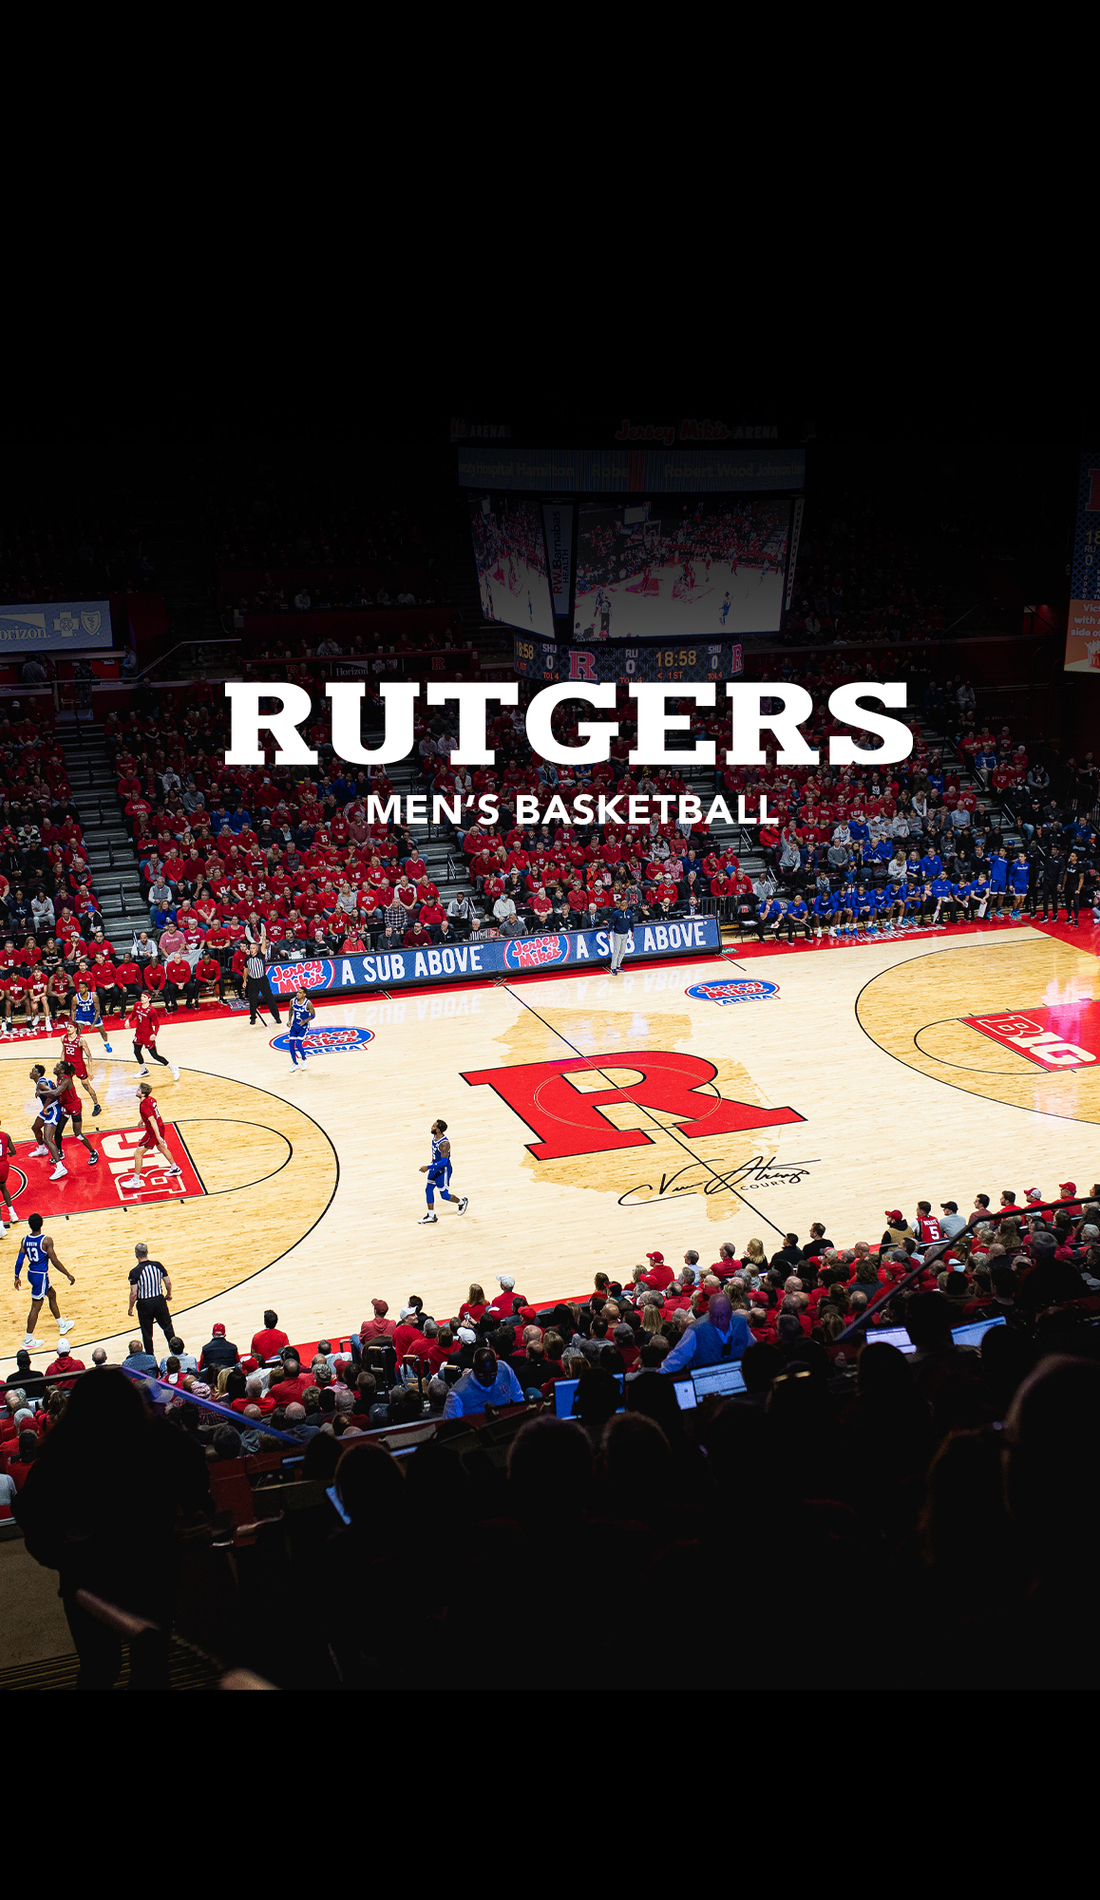 A Rutgers Scarlet Knights Basketball live event